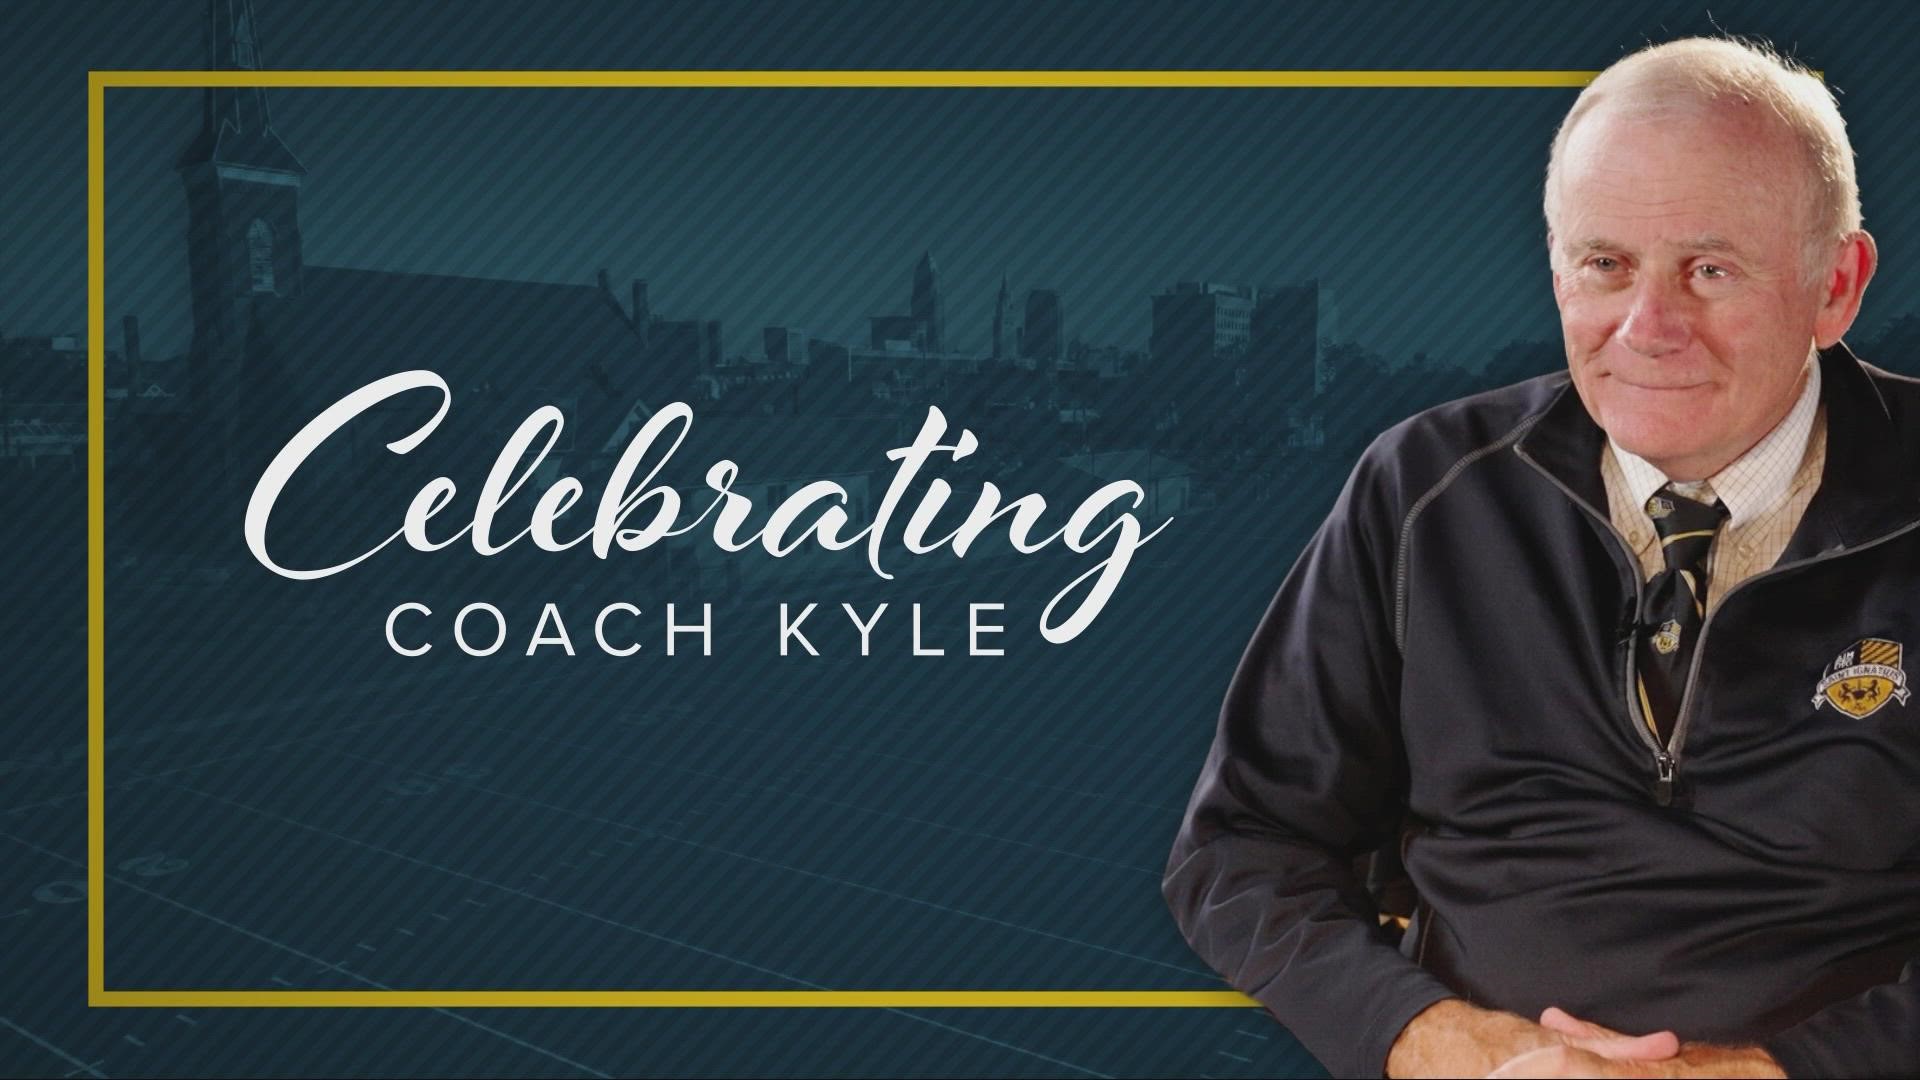 Kyle is set to coach his final regular-season game Friday night in Cleveland.